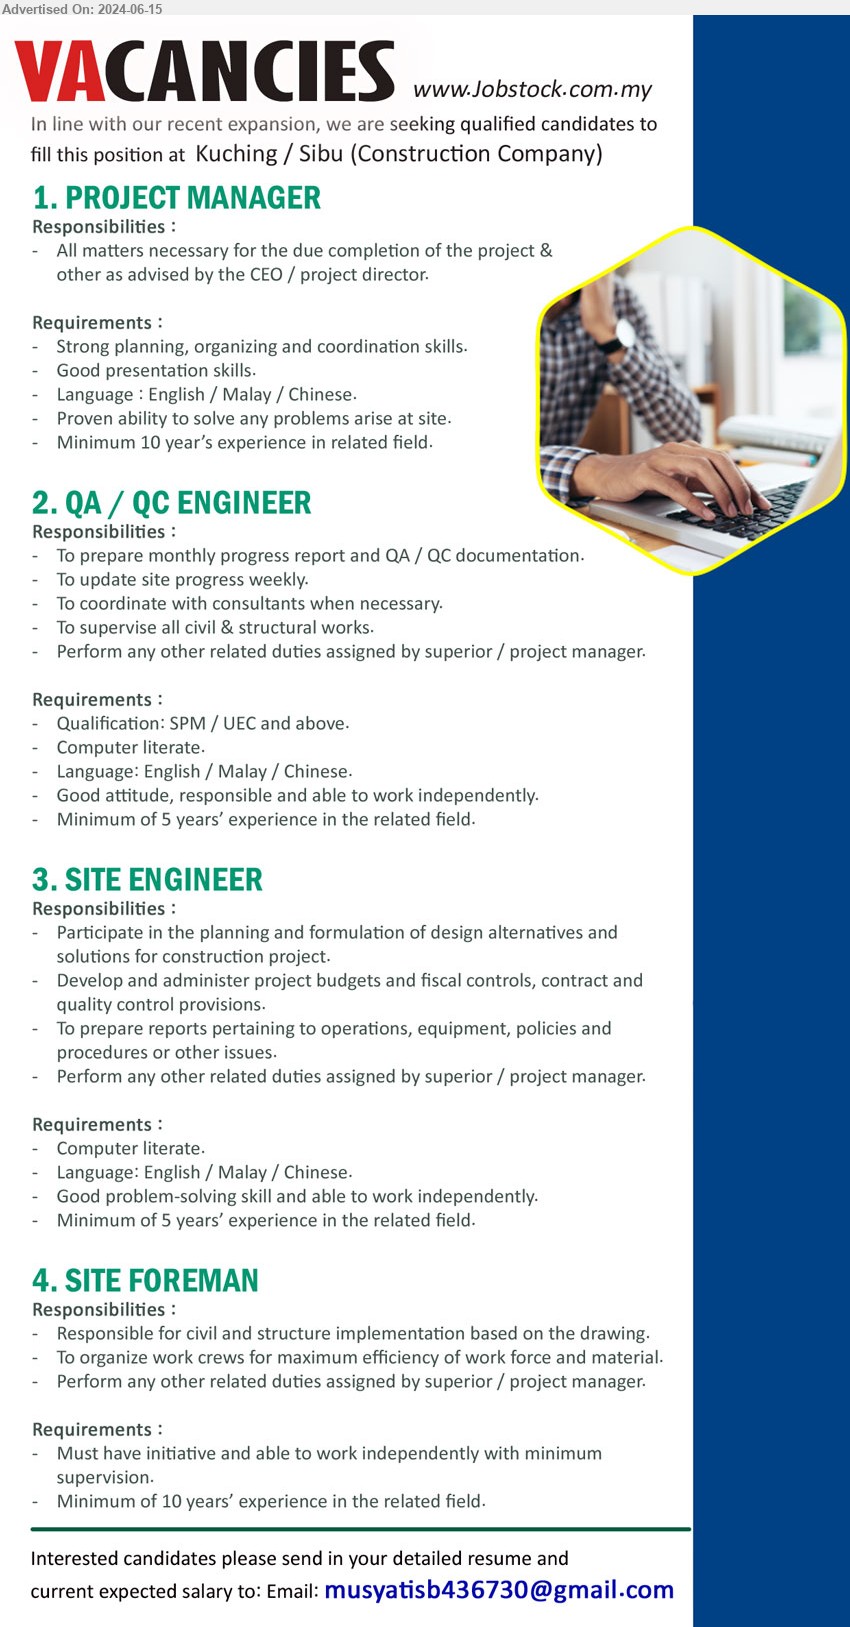 ADVERTISER - 1. PROJECT MANAGER (Kuching, Sibu), 10 yrs. exp., All matters necessary for the due completion of the project &
other as advised by the CEO / project director,...
2. QA / QC ENGINEER (Kuching, Sibu), SPM / UEC and above, Computer literate.,...
3. SITE ENGINEER  (Kuching, Sibu), 5 yrs. exp., Participate in the planning and formulation of design alternatives and 
solutions for construction project.,...
4. SITE FOREMAN (Kuching, Sibu), 10 yrs. exp., Responsible for civil and structure implementation based on the drawing,...
Email resume to ...